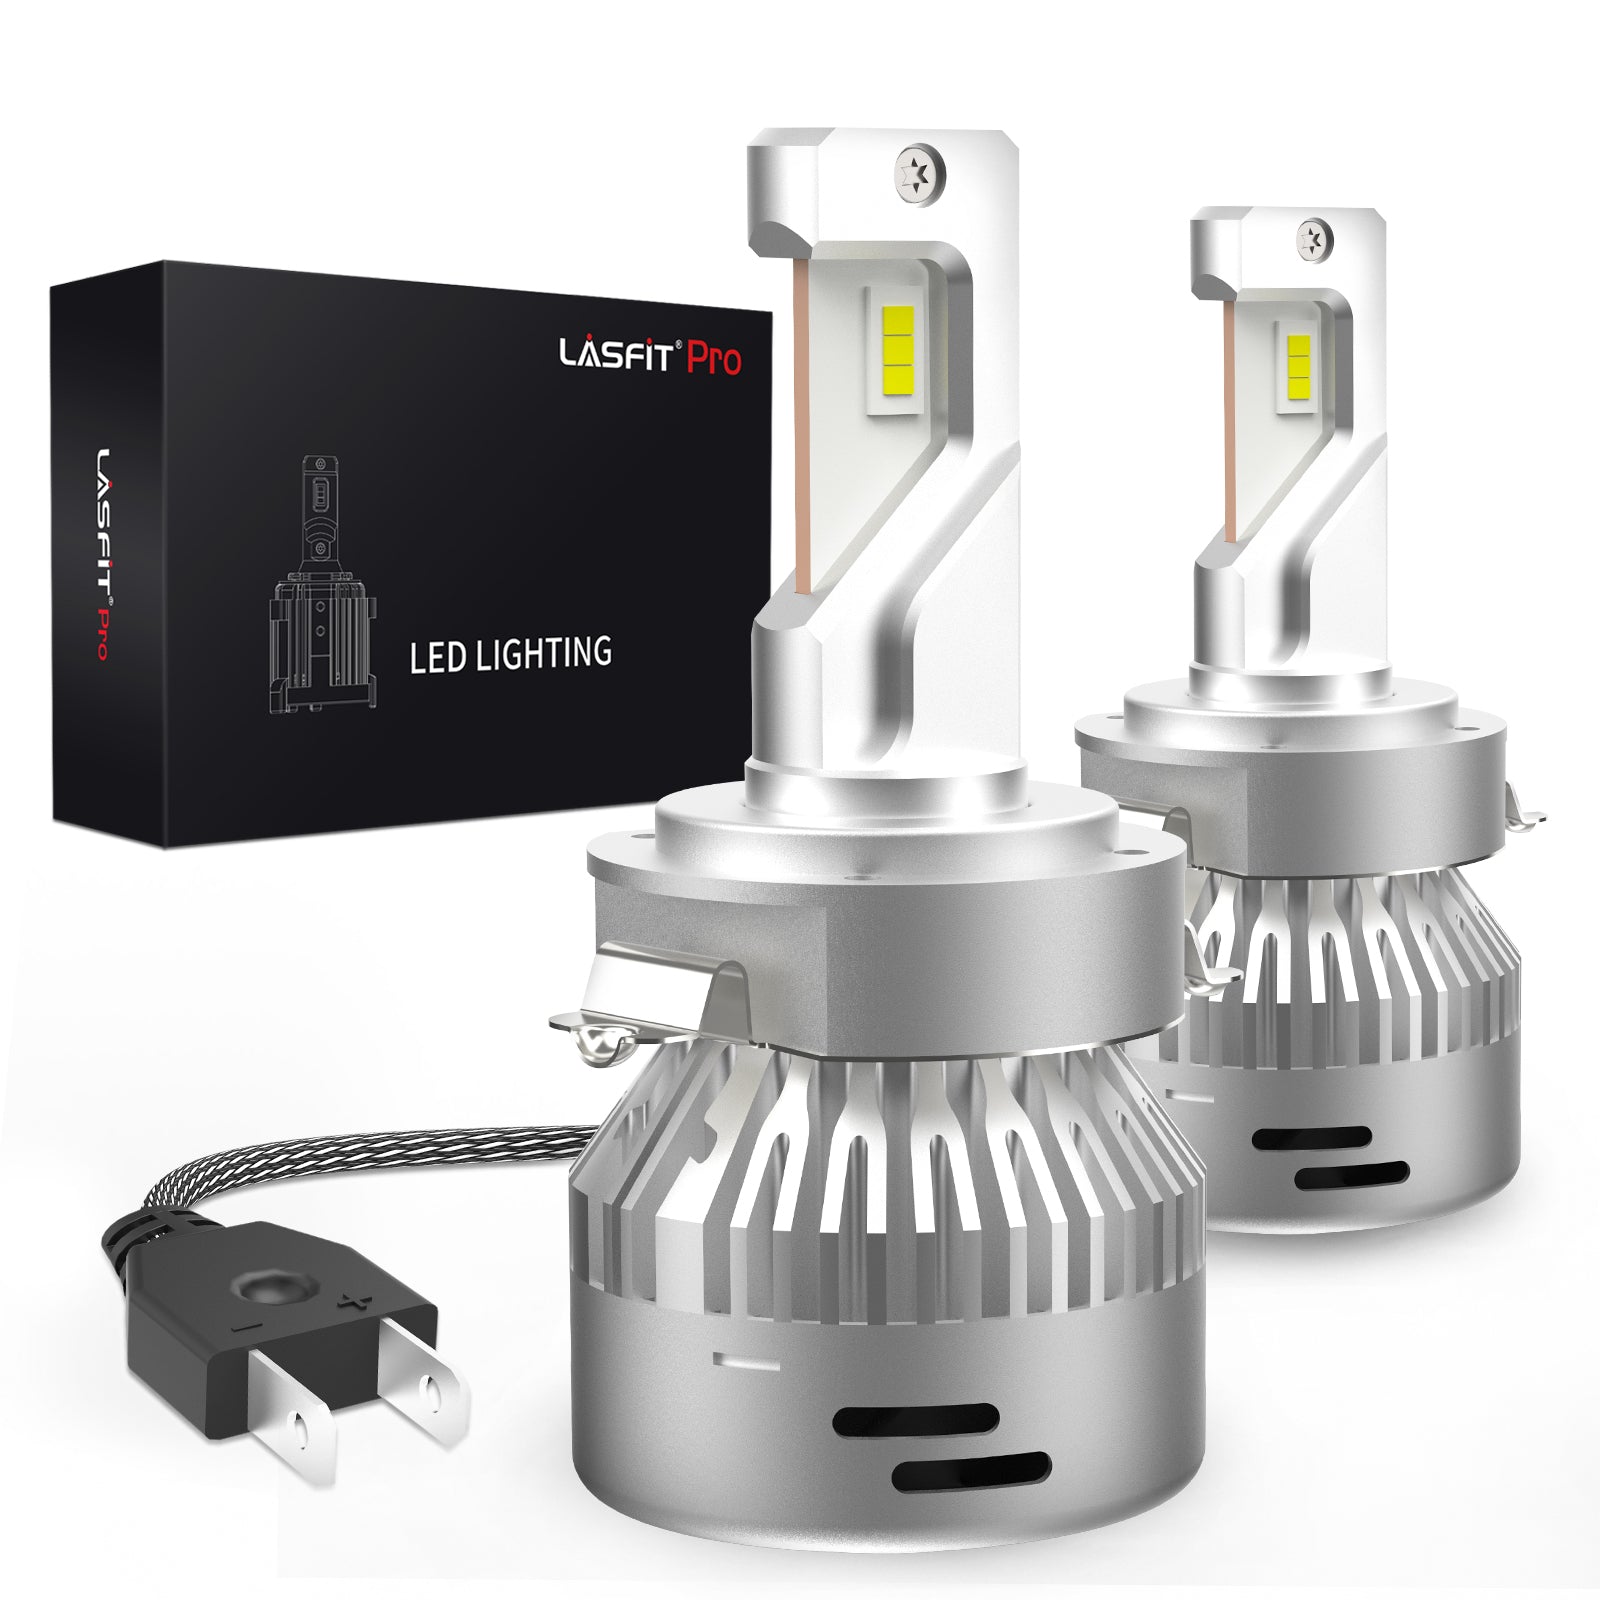 Kit Led H7 Philips Ultinon 3500r 30w 2600lm